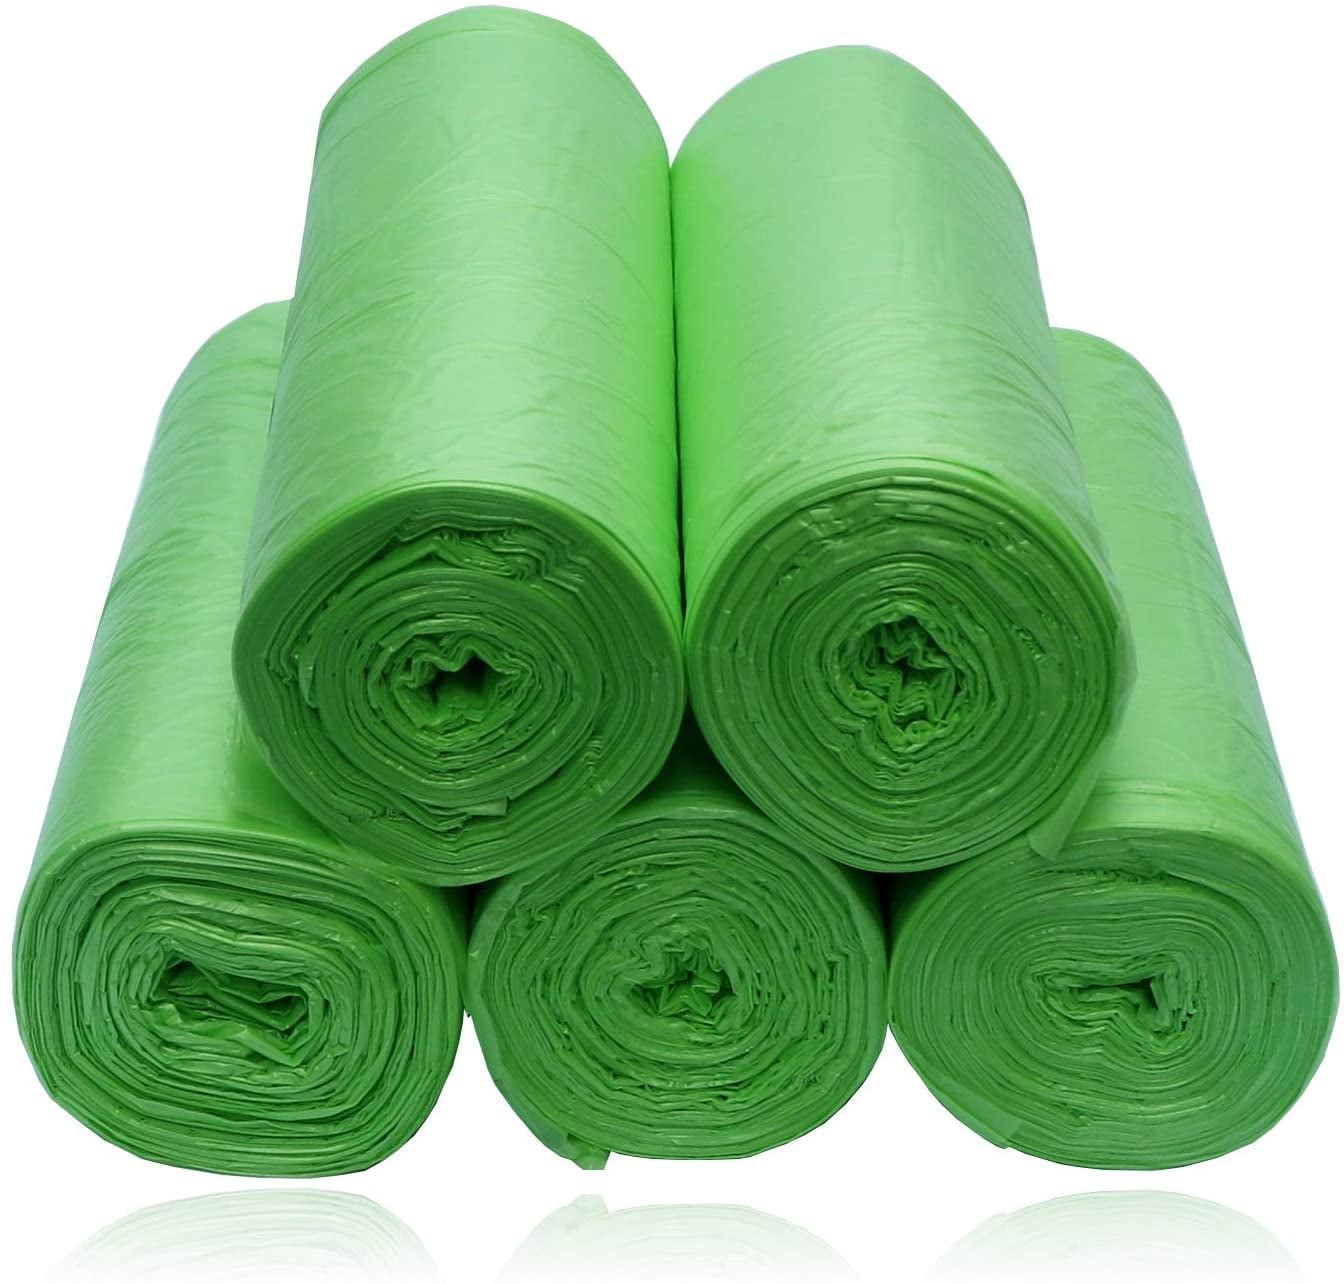 3 Gallon Biodegradable Small Garbage Bags Green Wastebasket Liners 100 Counts 